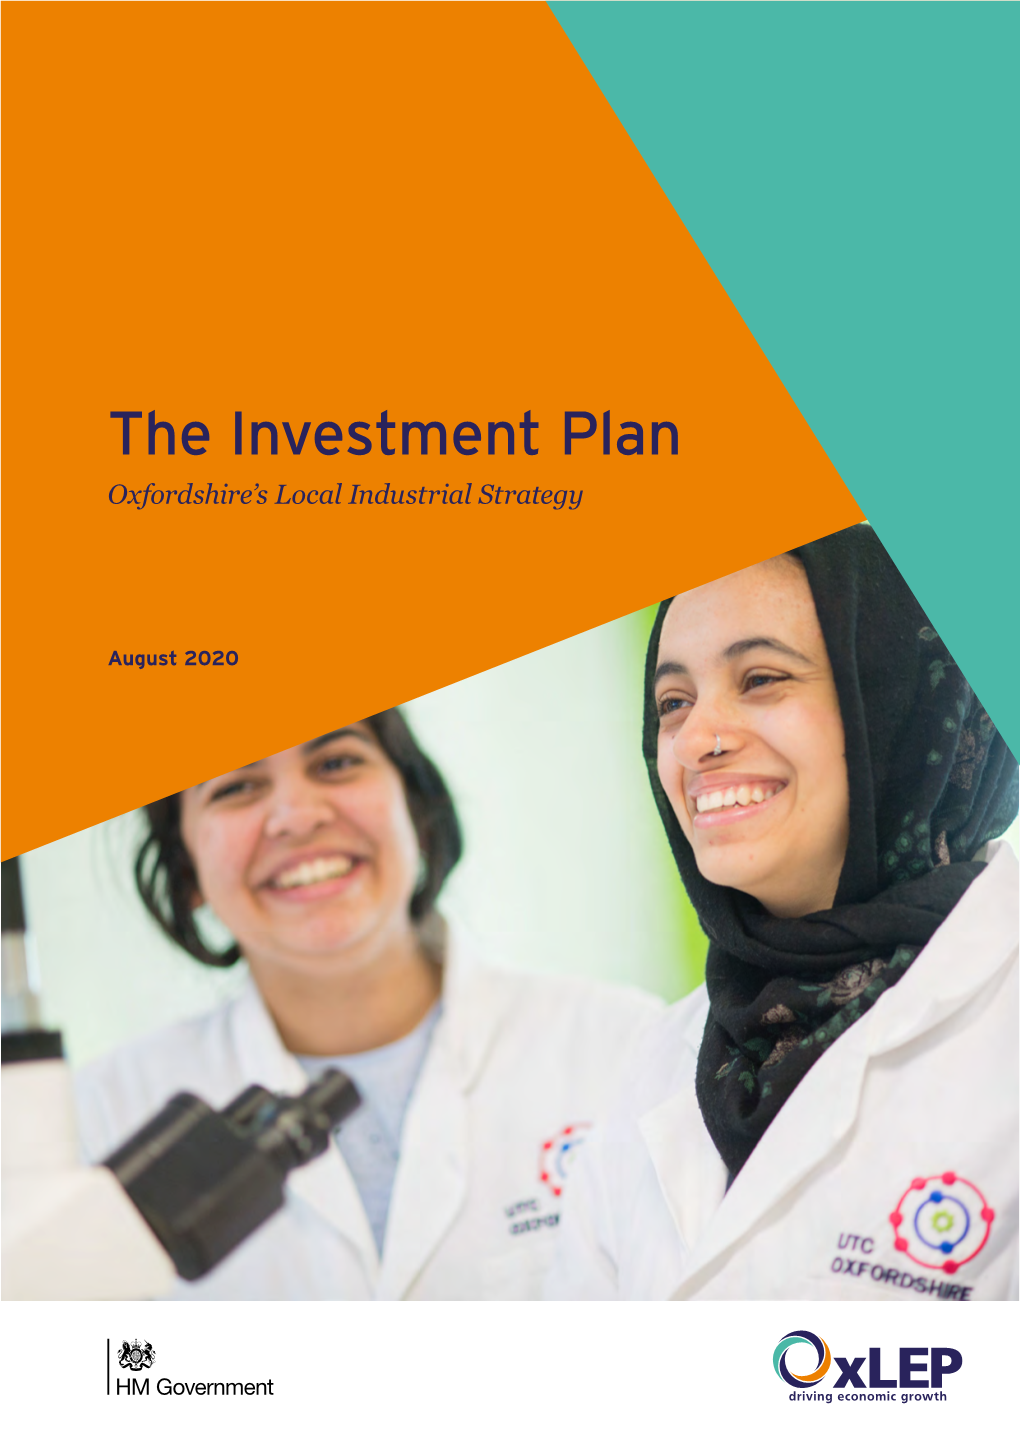 The Investment Plan: Oxfordshire's Local Industrial Strategy